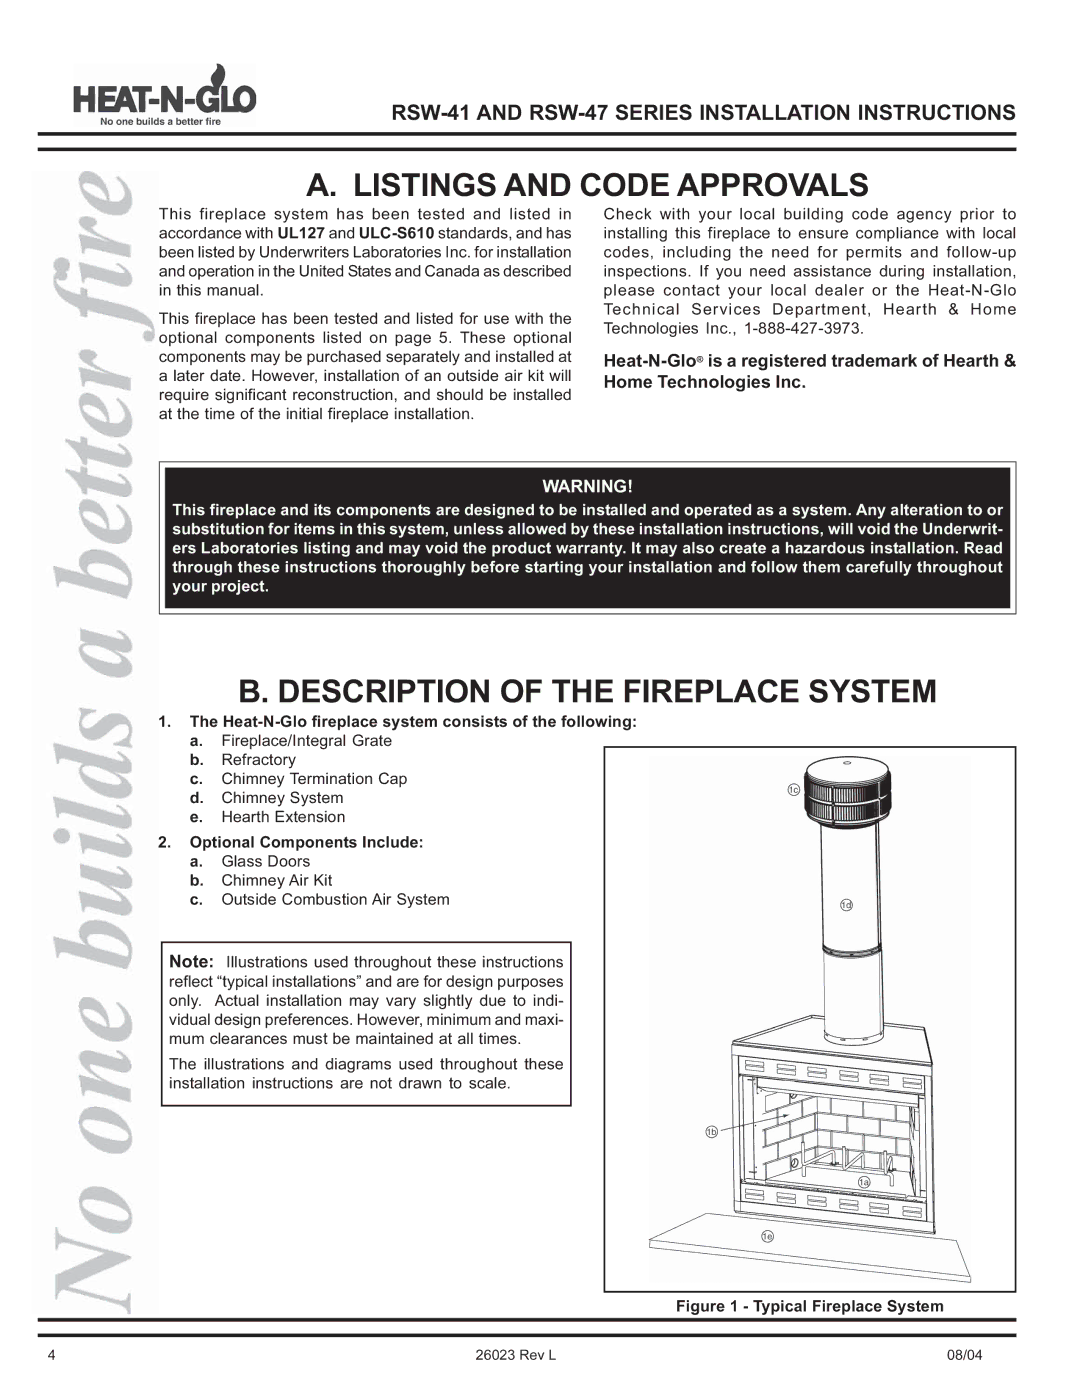 Hearth and Home Technologies RSW-41, RSW-47 manual Listings and Code Approvals, Description of the Fireplace System 